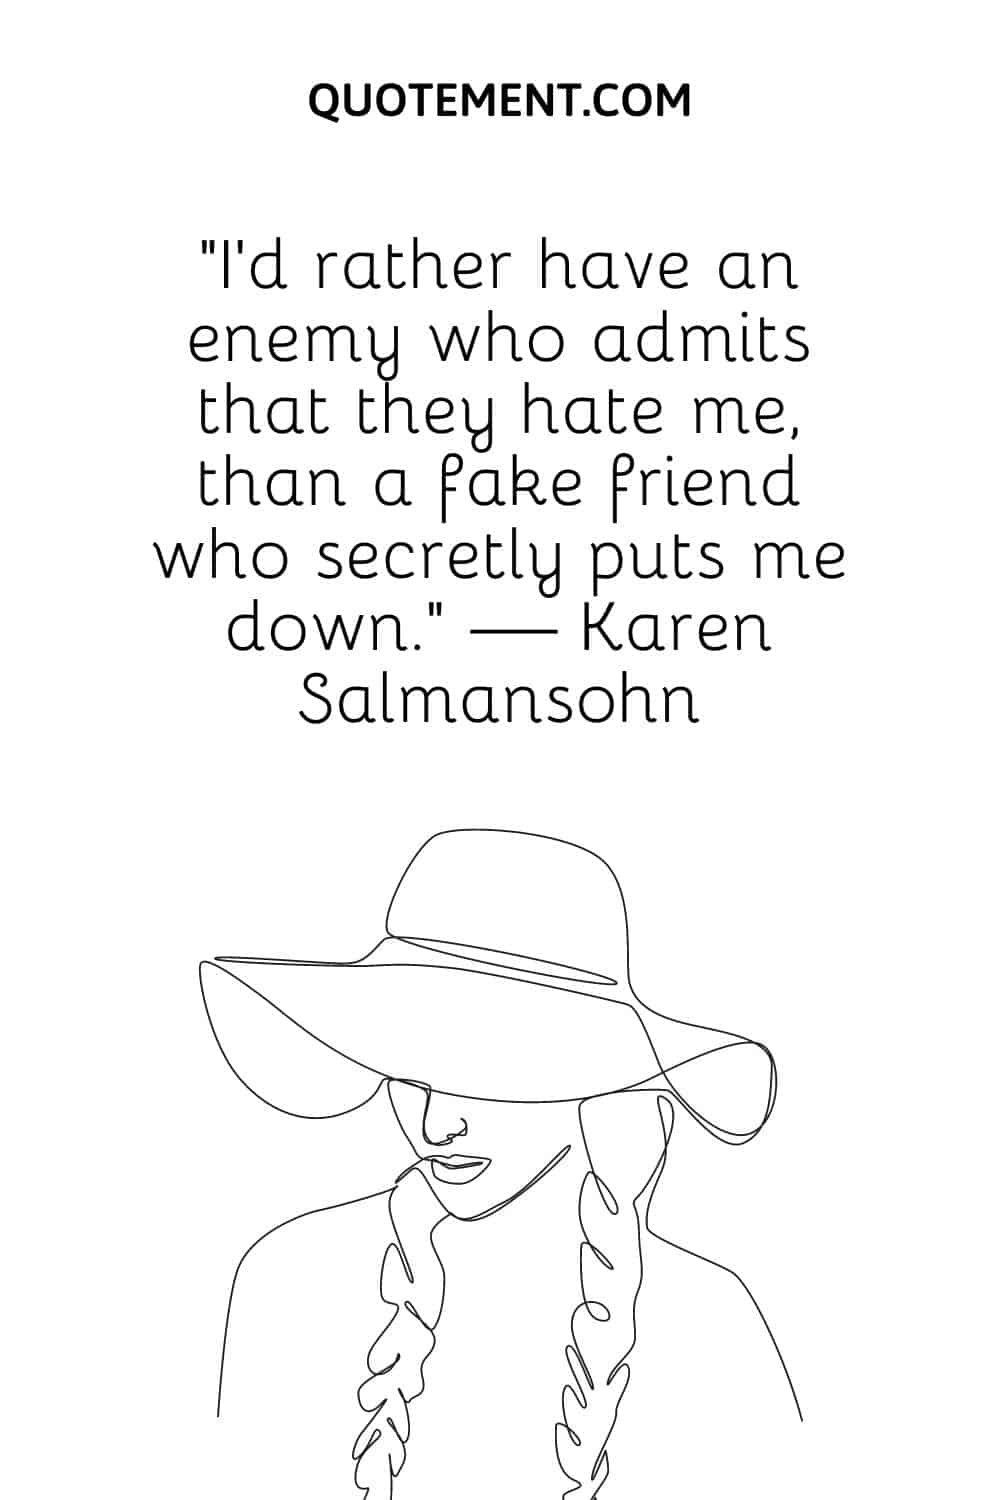 I’d rather have an enemy who admits that they hate me, than a fake friend who secretly puts me down